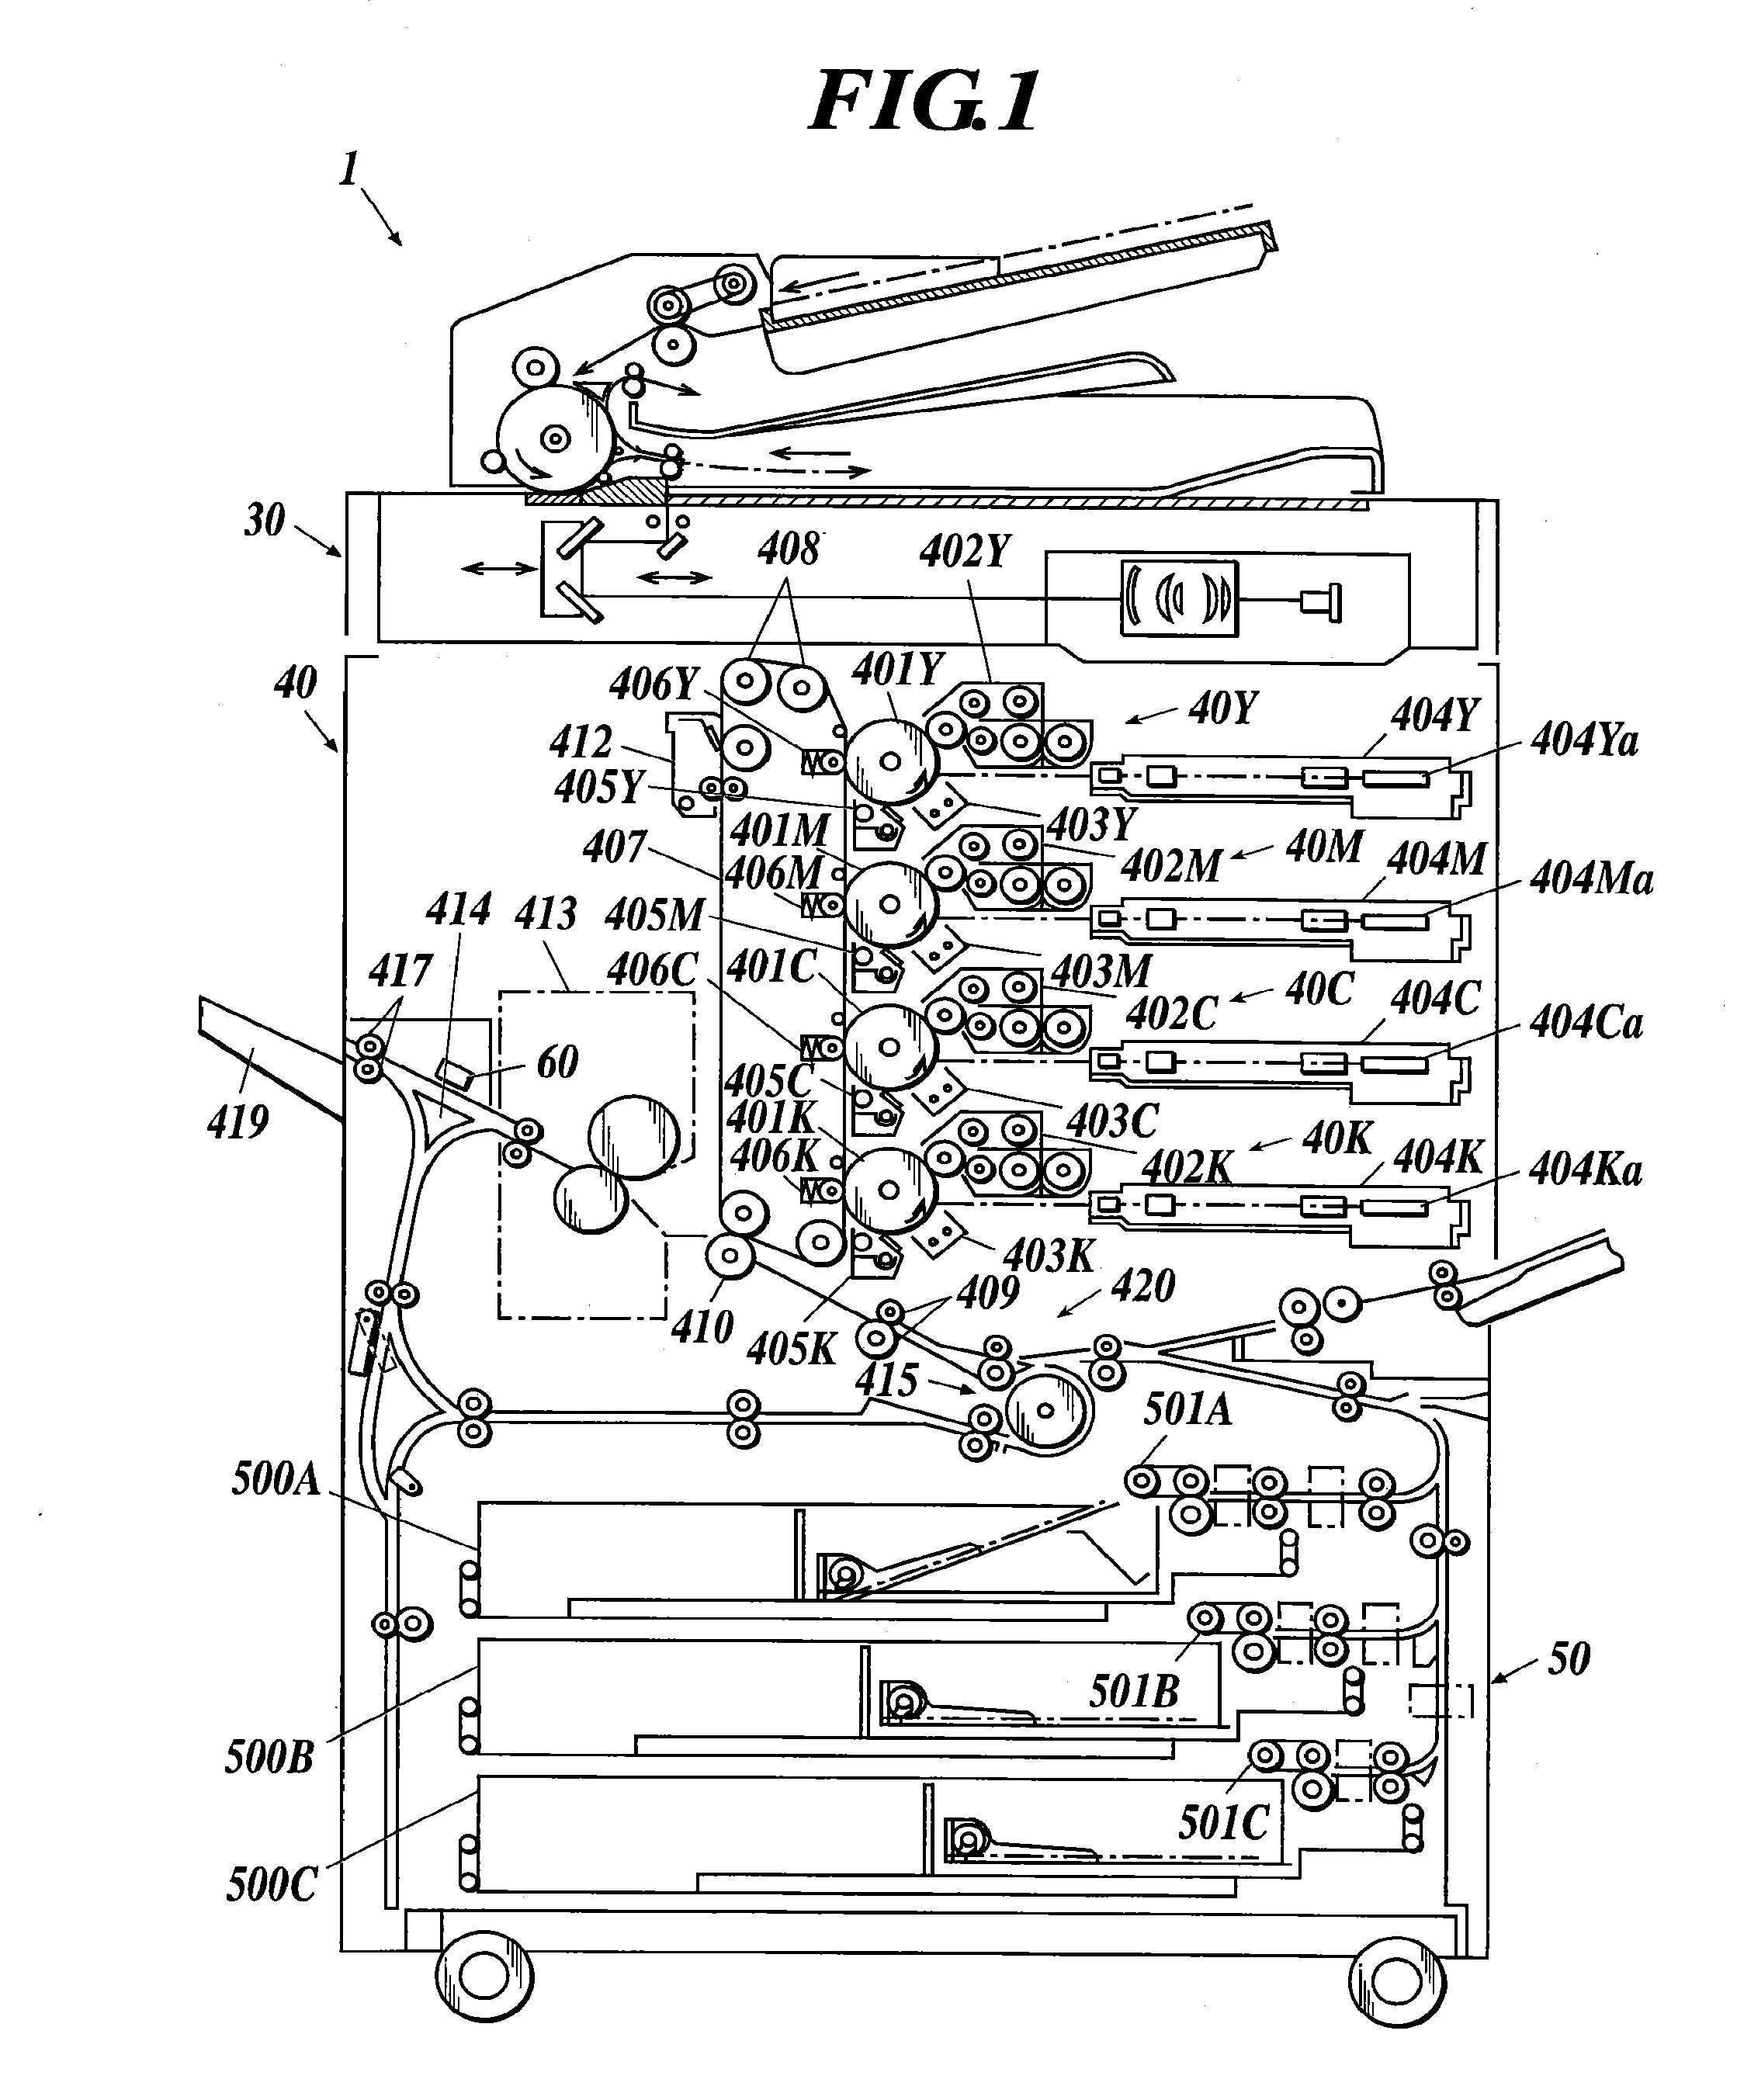 Image forming apparatus, image forming system, and image density adjustment method